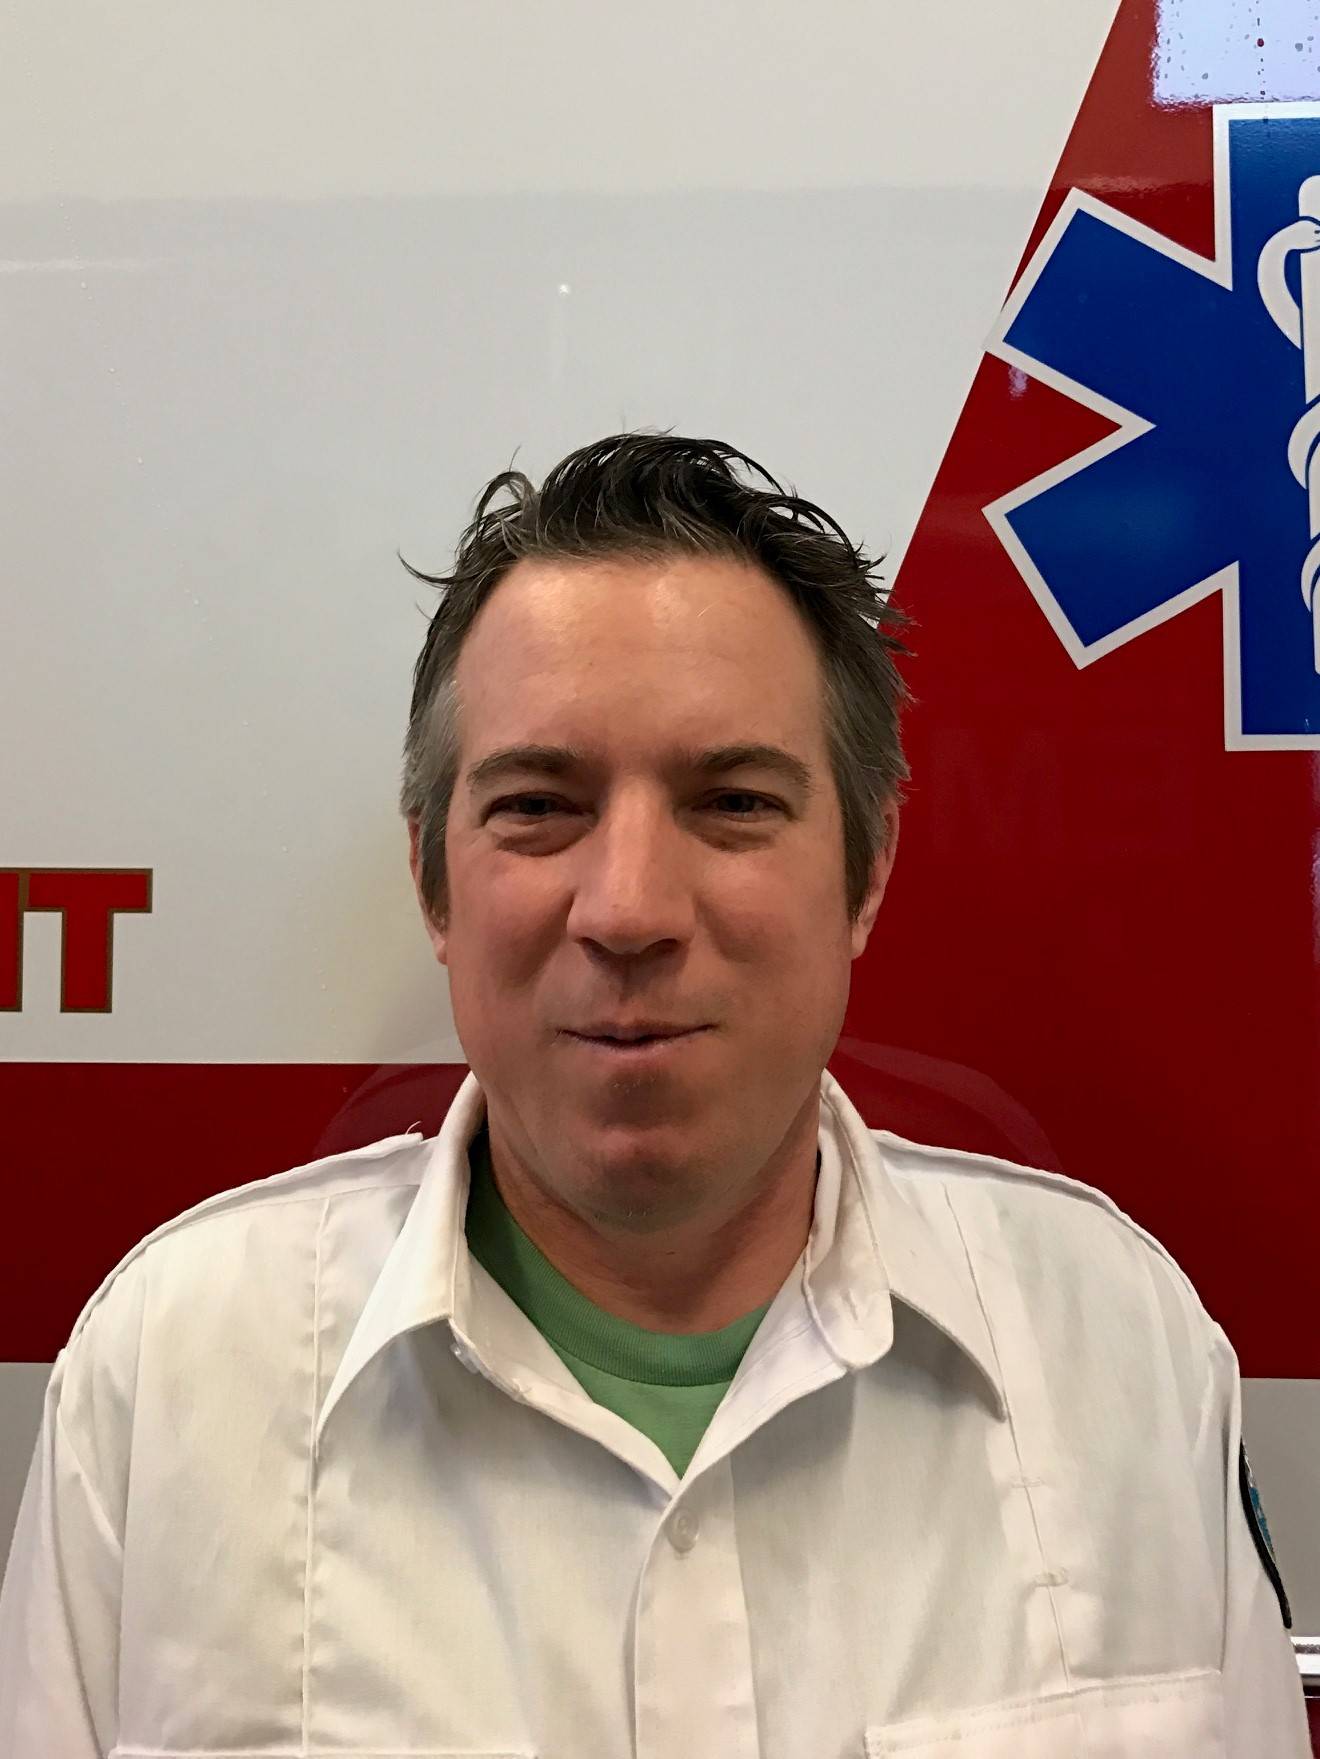 EMT of the month Matthew Wickey